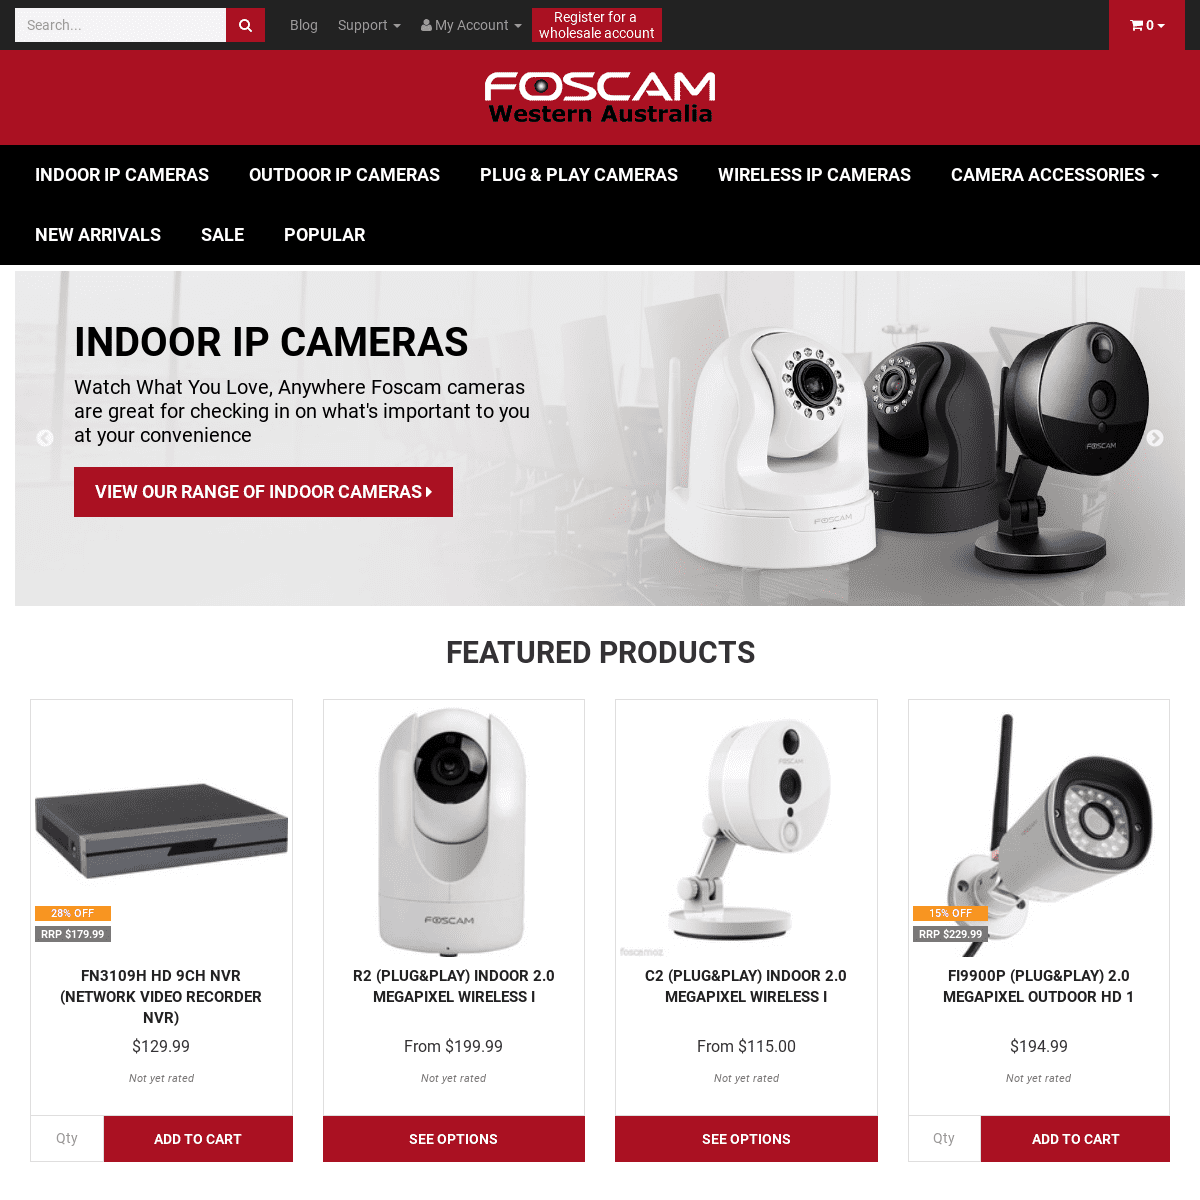 Foscam Western Australia, Official Distributor of IP Cameras - Home Page